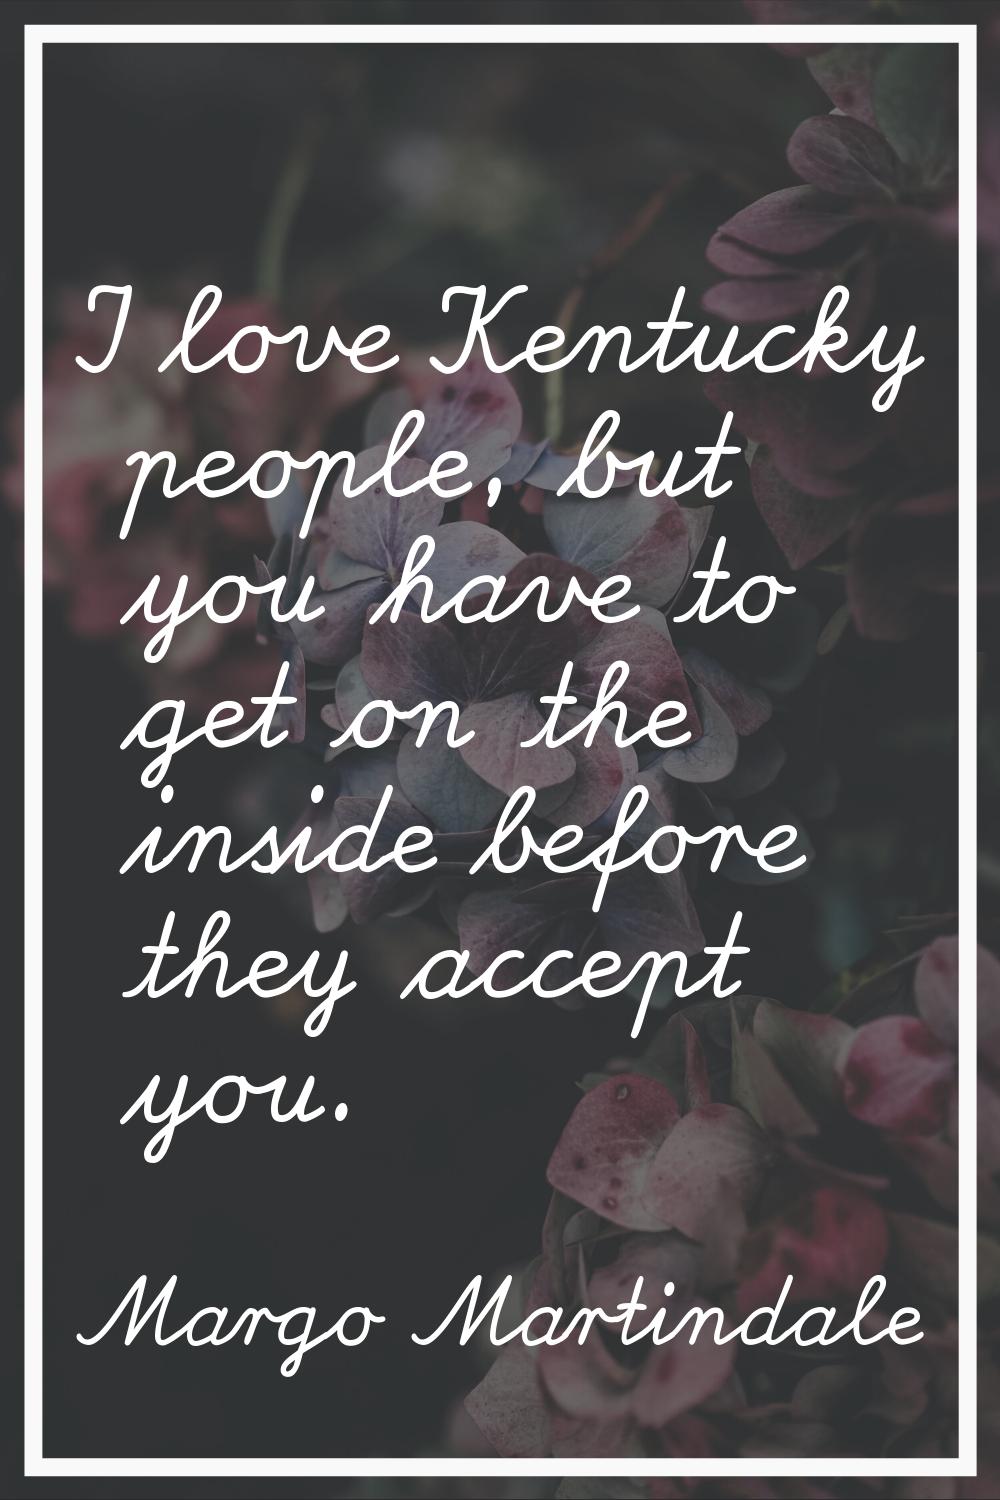 I love Kentucky people, but you have to get on the inside before they accept you.